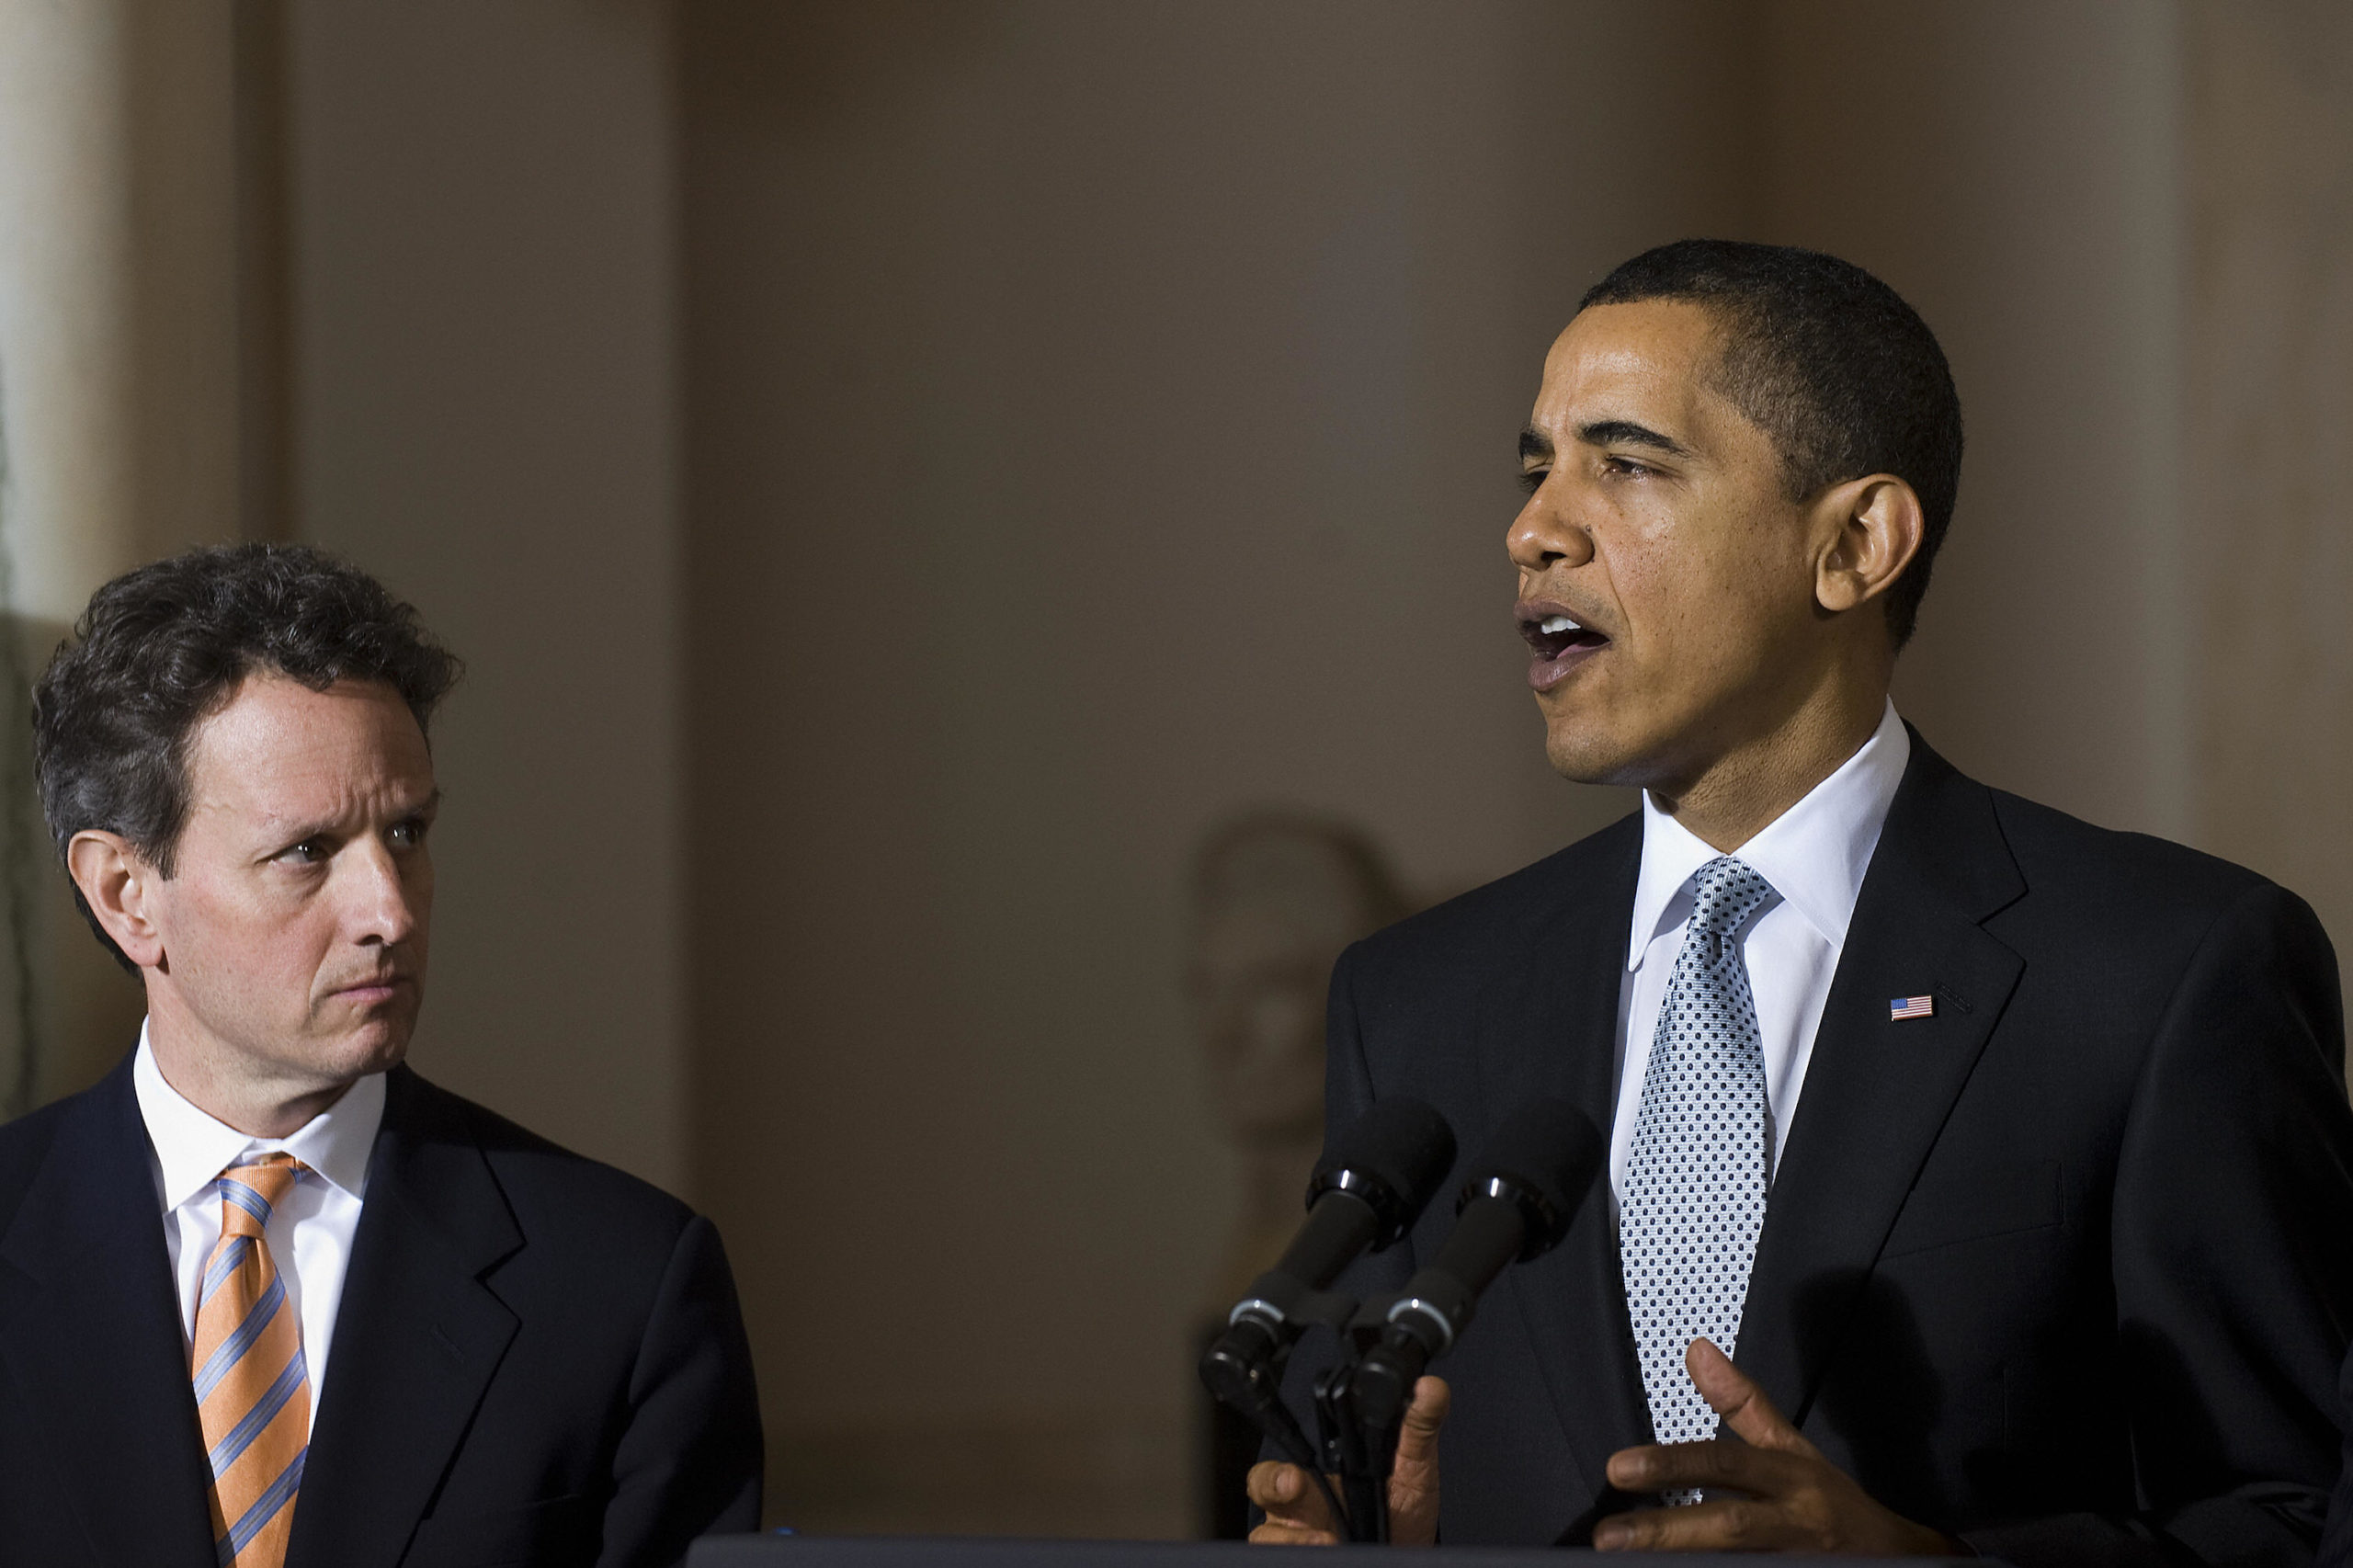 US President Barack Obama announces the terms of the latest auto industry bailout at the White House in Washington, DC, March 30, 2009, with US Treasury Secretary Timothy Geithner. (Jim Watson/AFP via Getty Images)